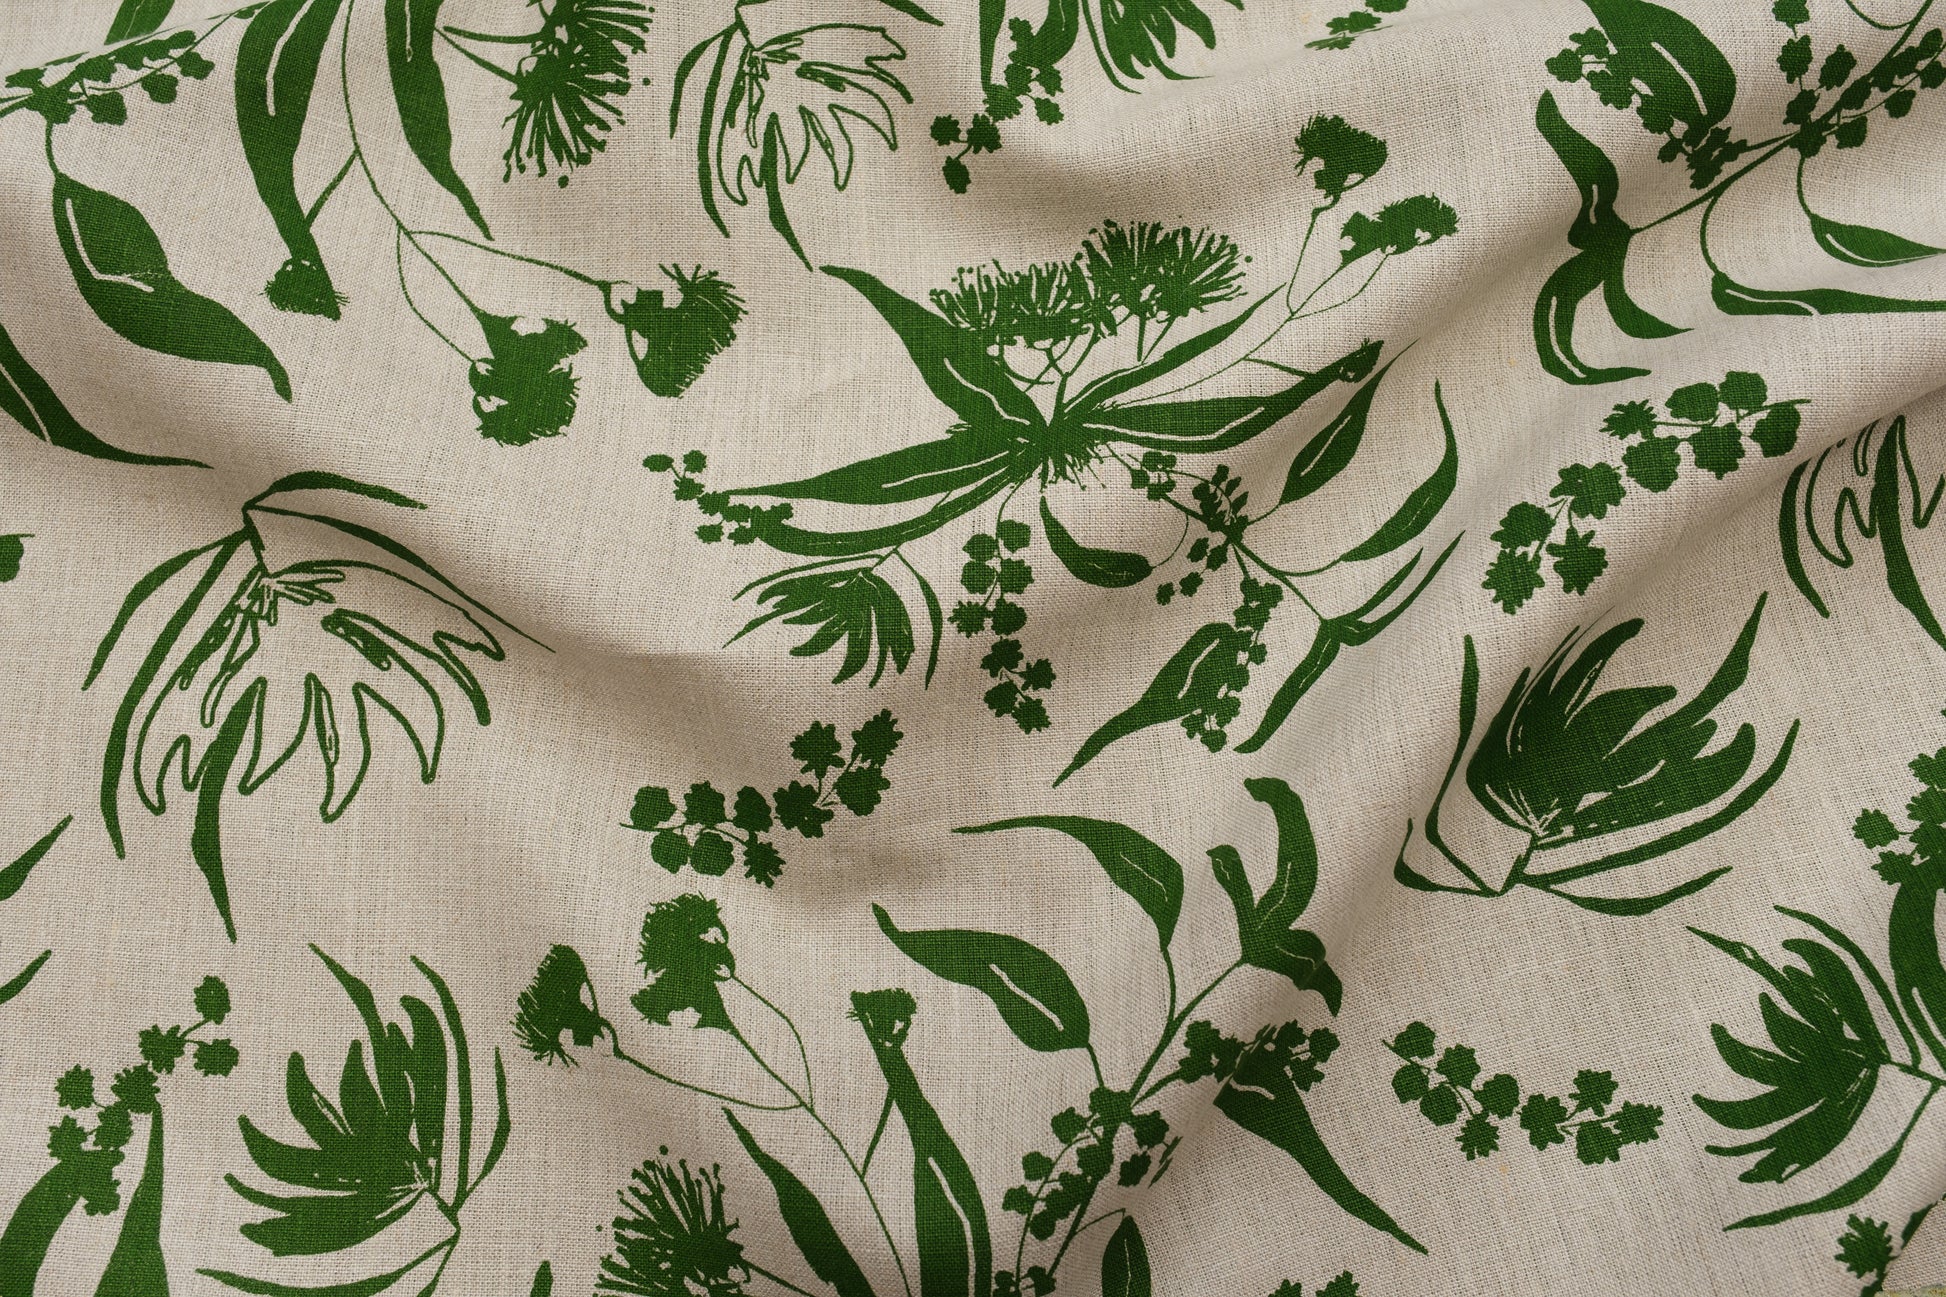 Flax linen hand screenprinted with Local Forage in Envy. Designed and Printed in Melbourne by Femke Textiles